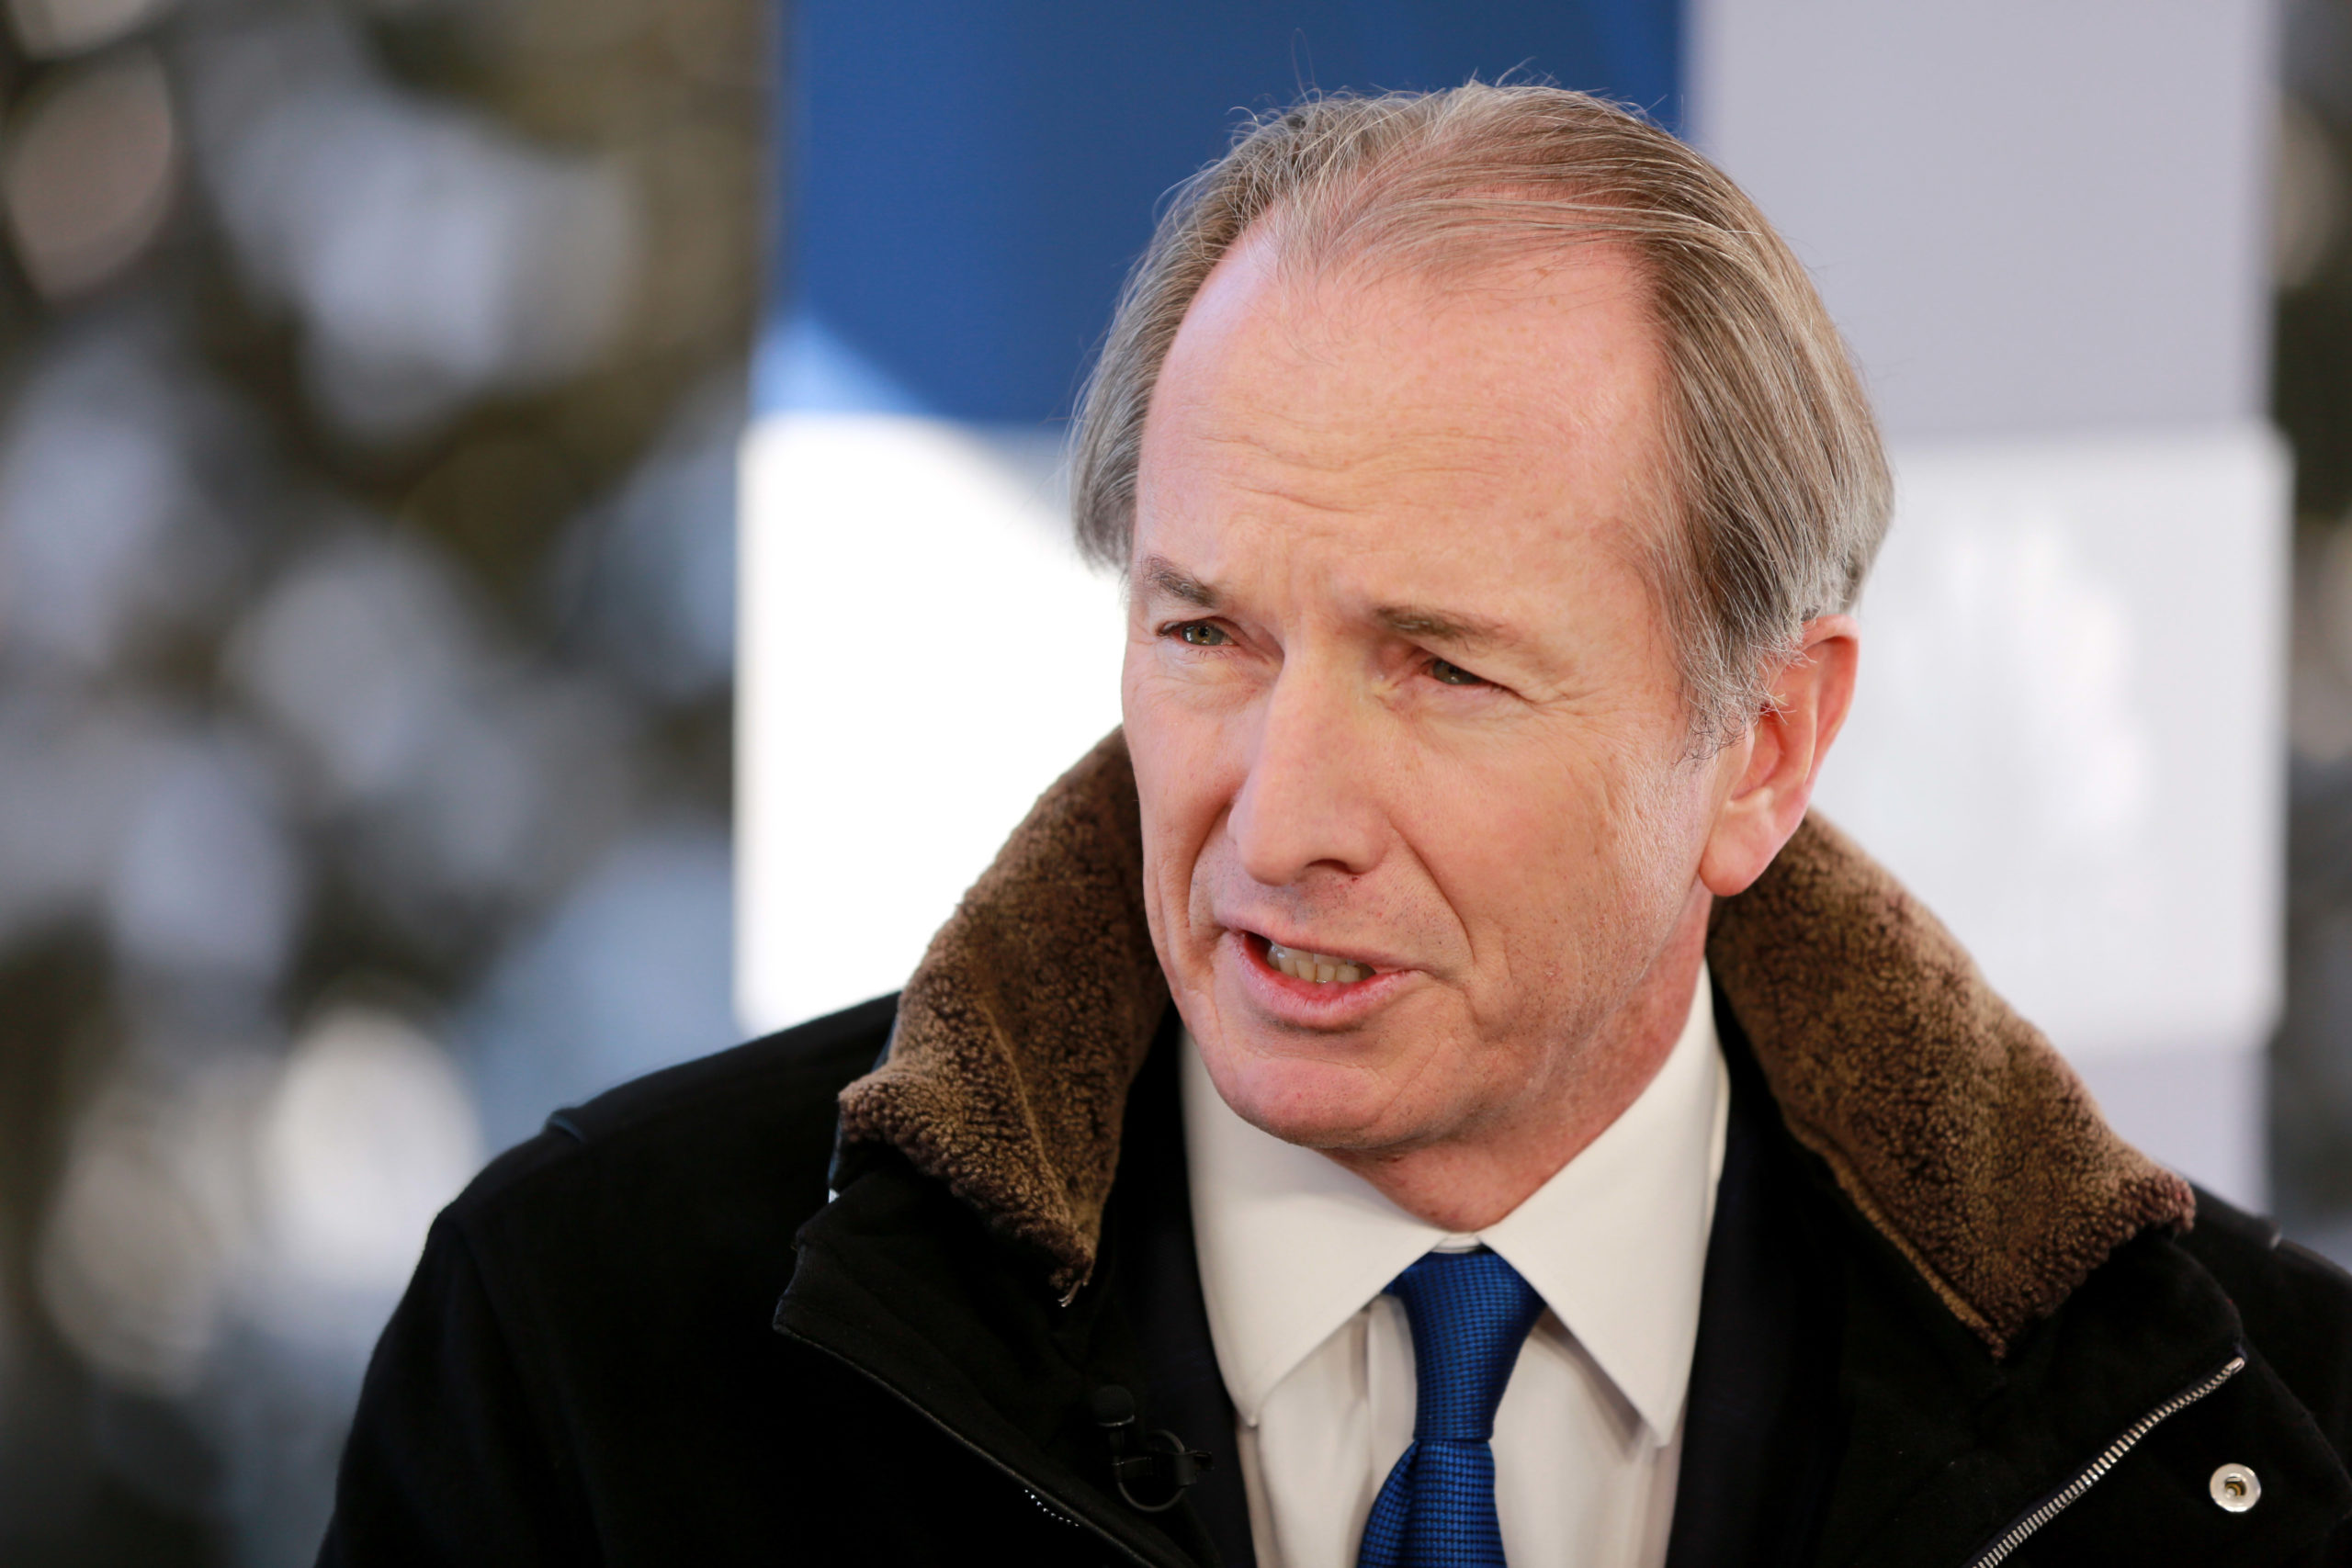 Morgan Stanley CEO James Gorman on how the E-Commerce deal got here collectively